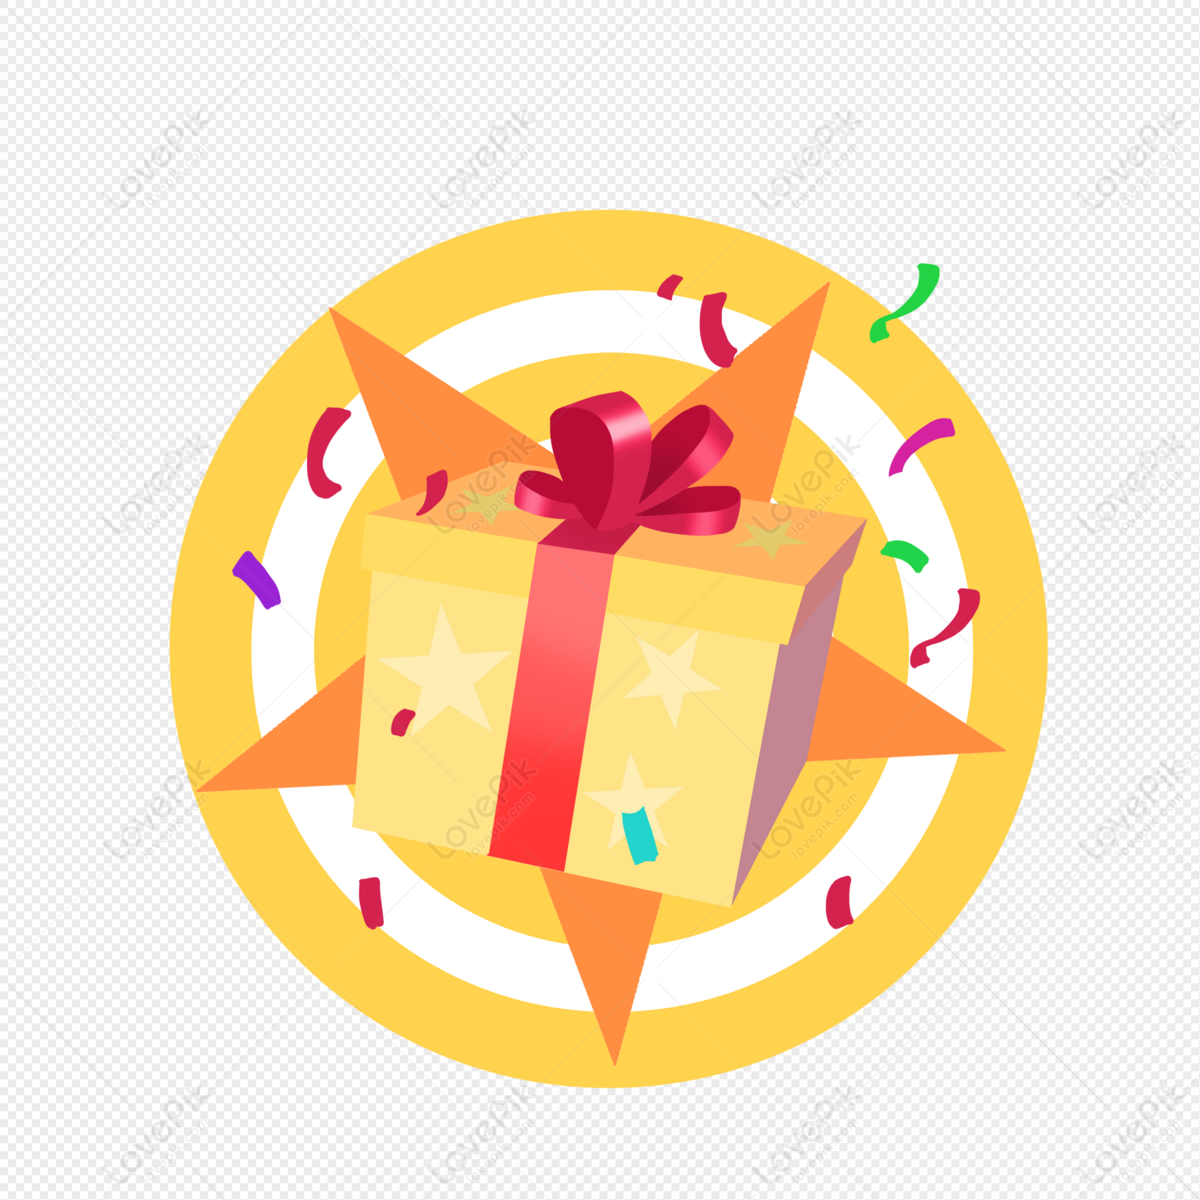 Happy birthday cartoon landing page with gift box Vector Image